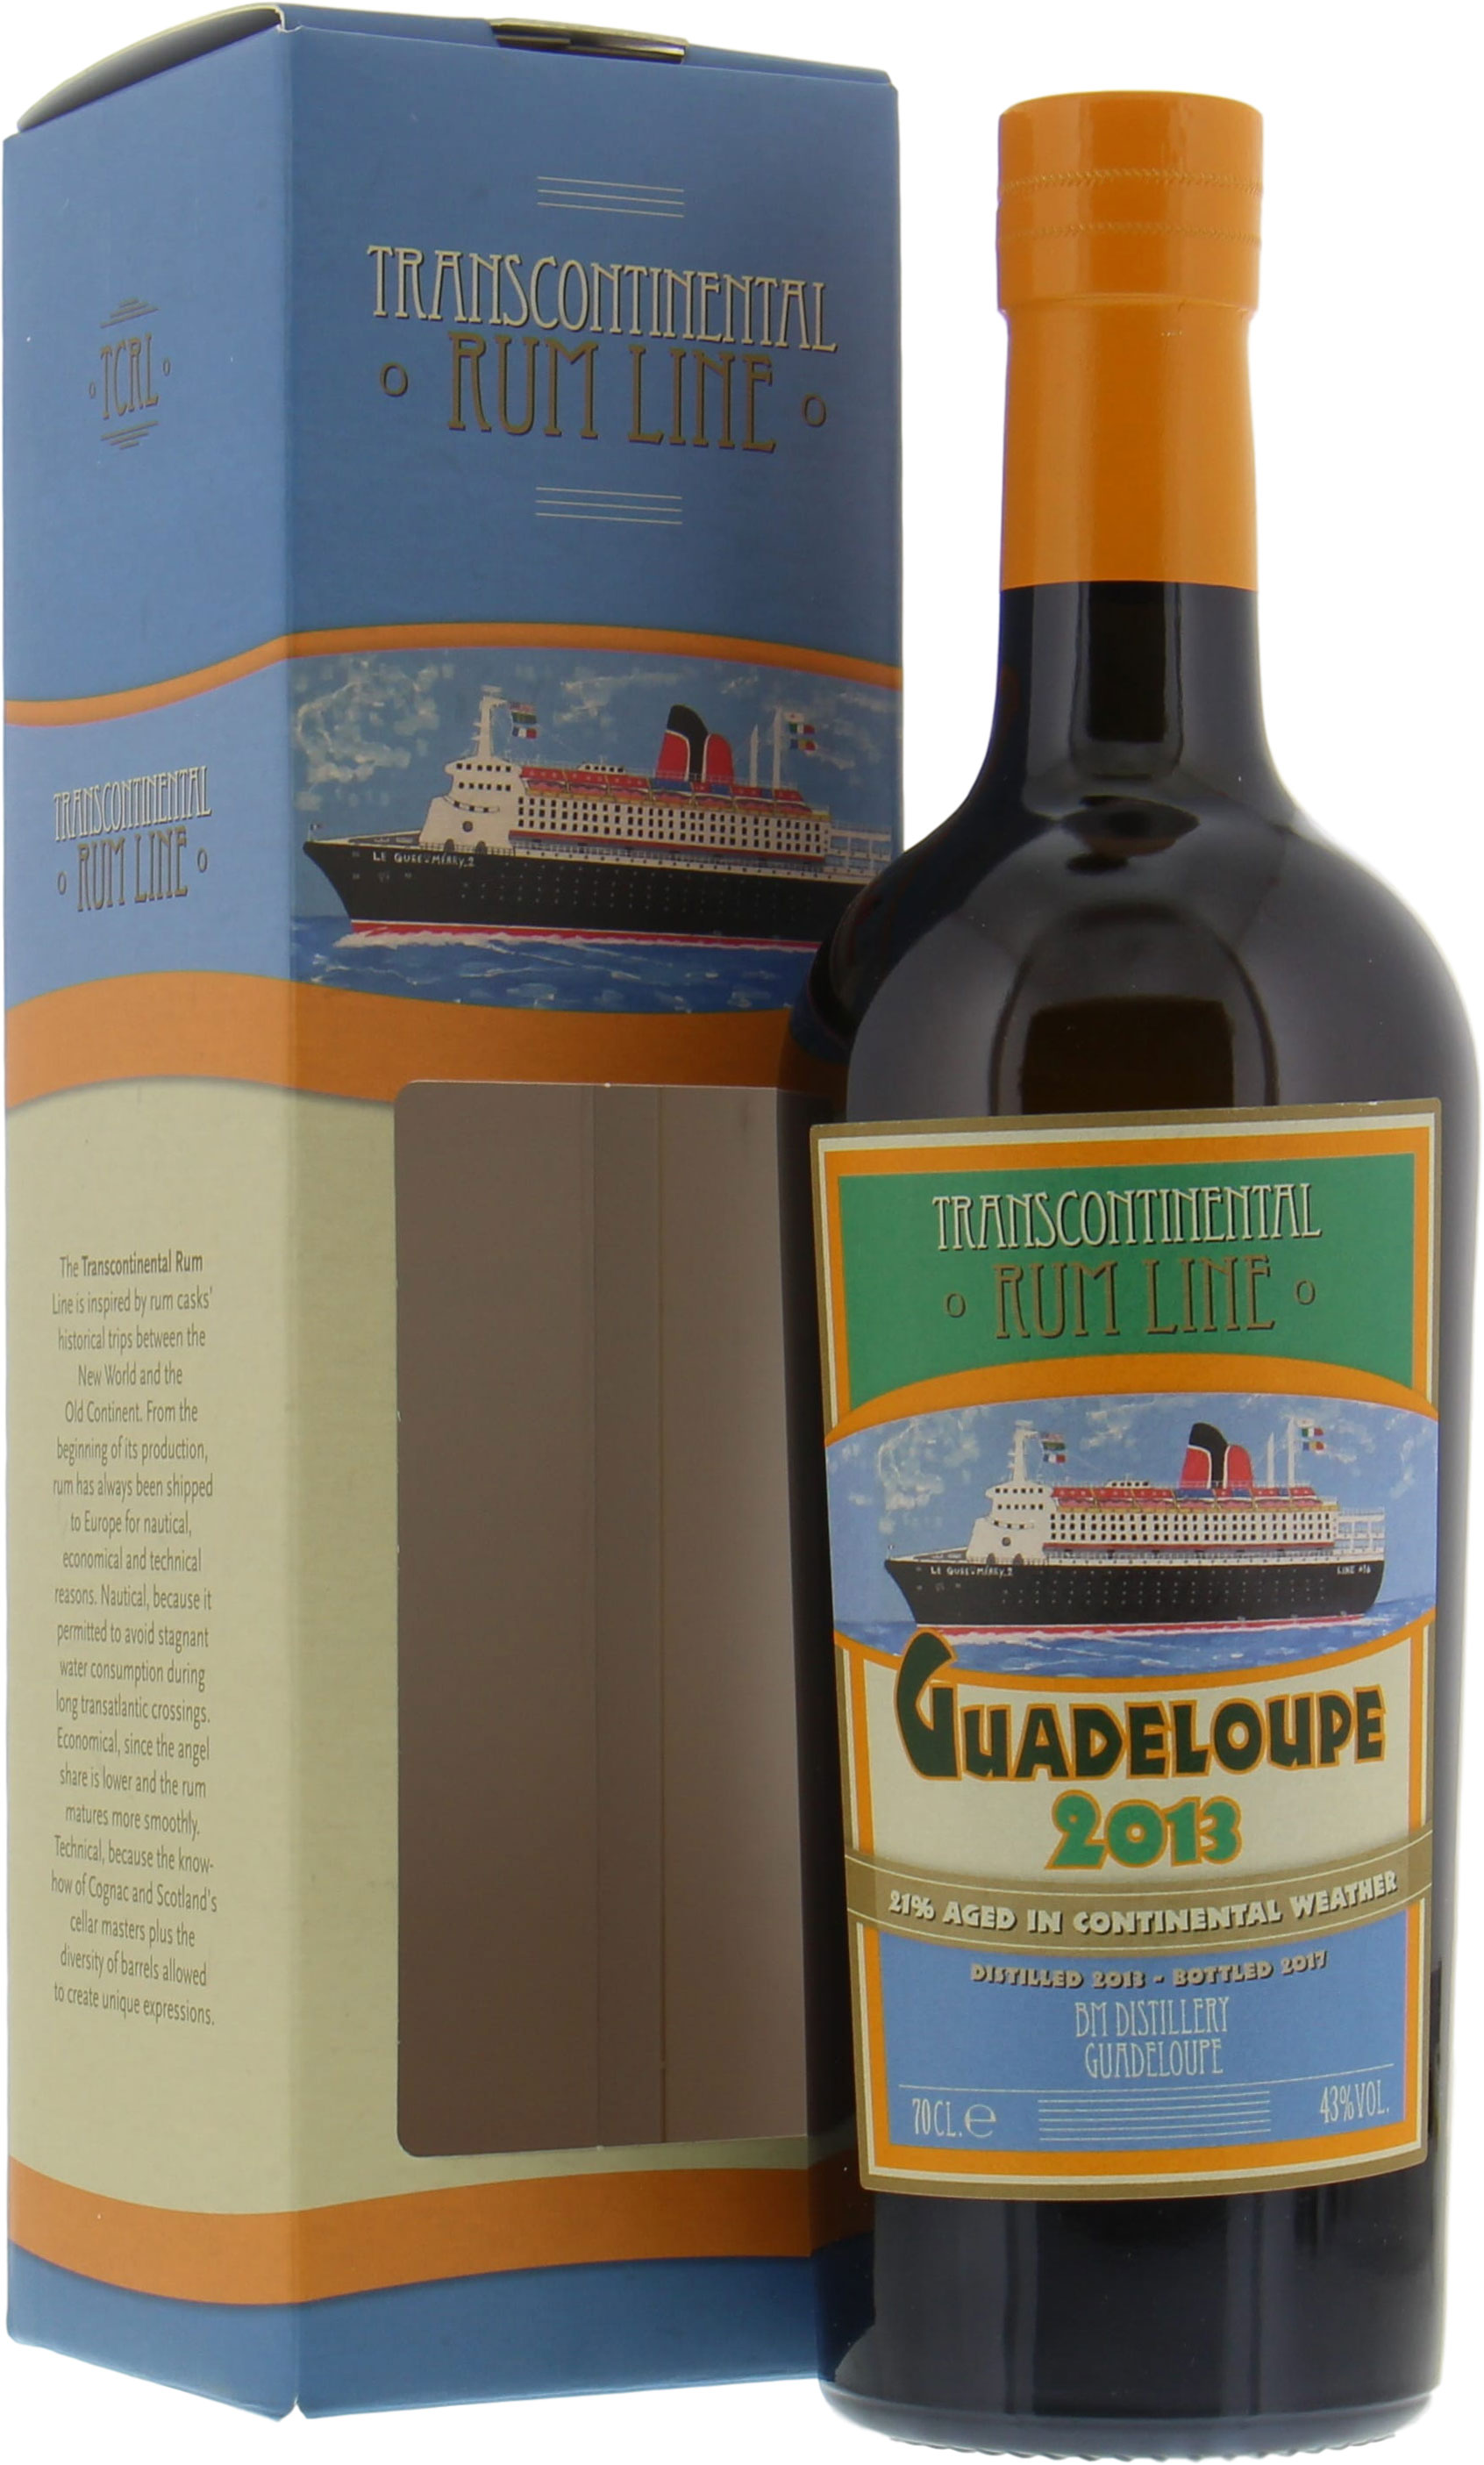 Transcontinental Rum Line - Guadeloupe Limited Edition 43% 2013